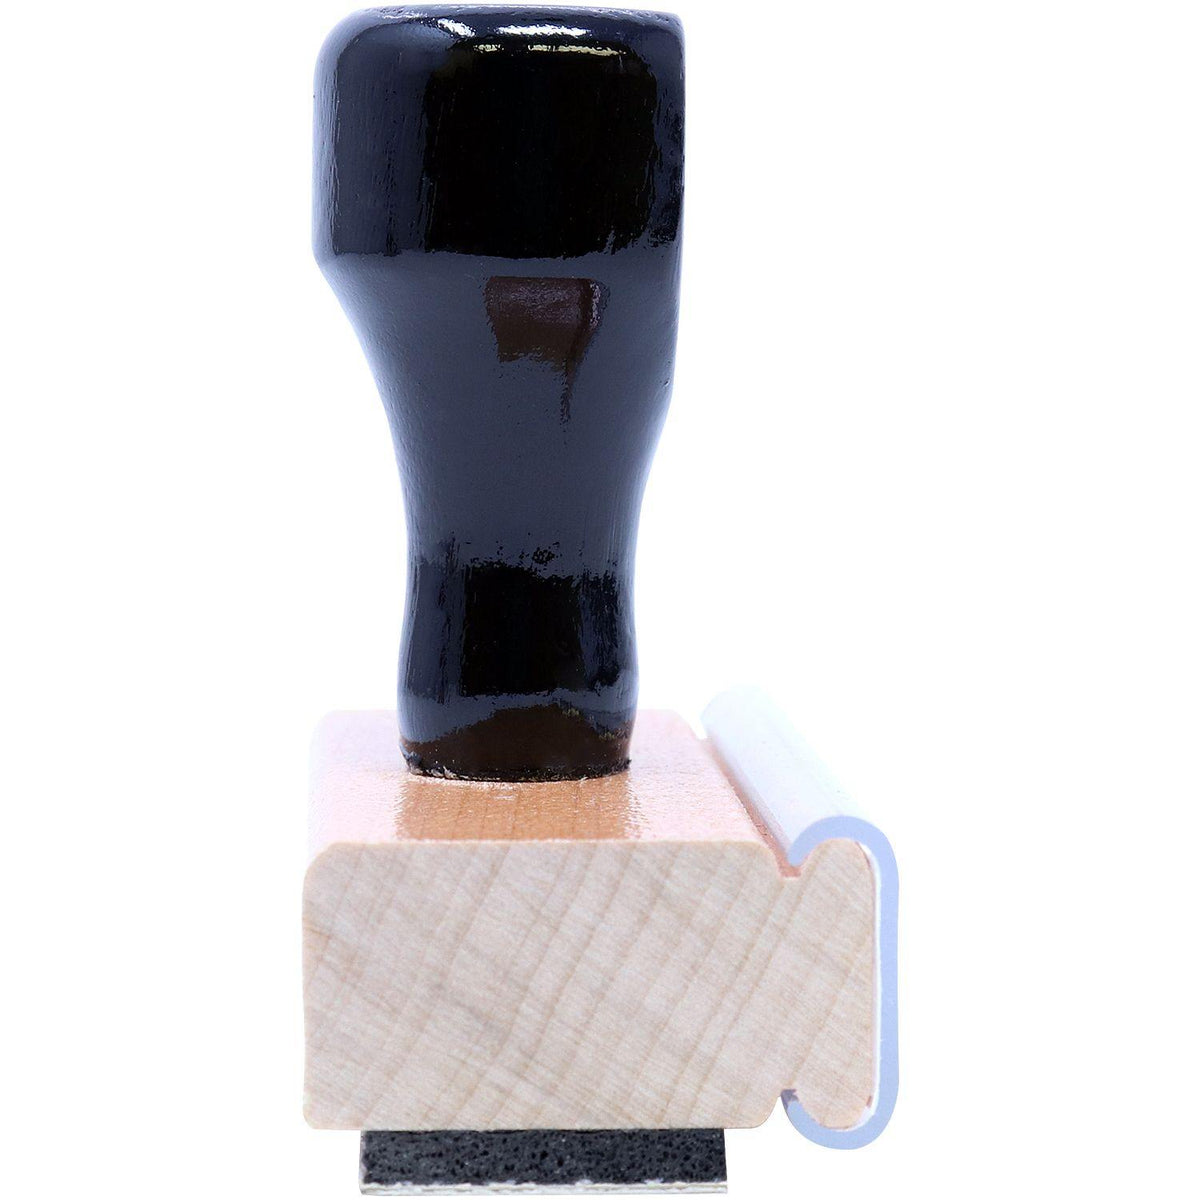 Side View of Large Official Rubber Stamp